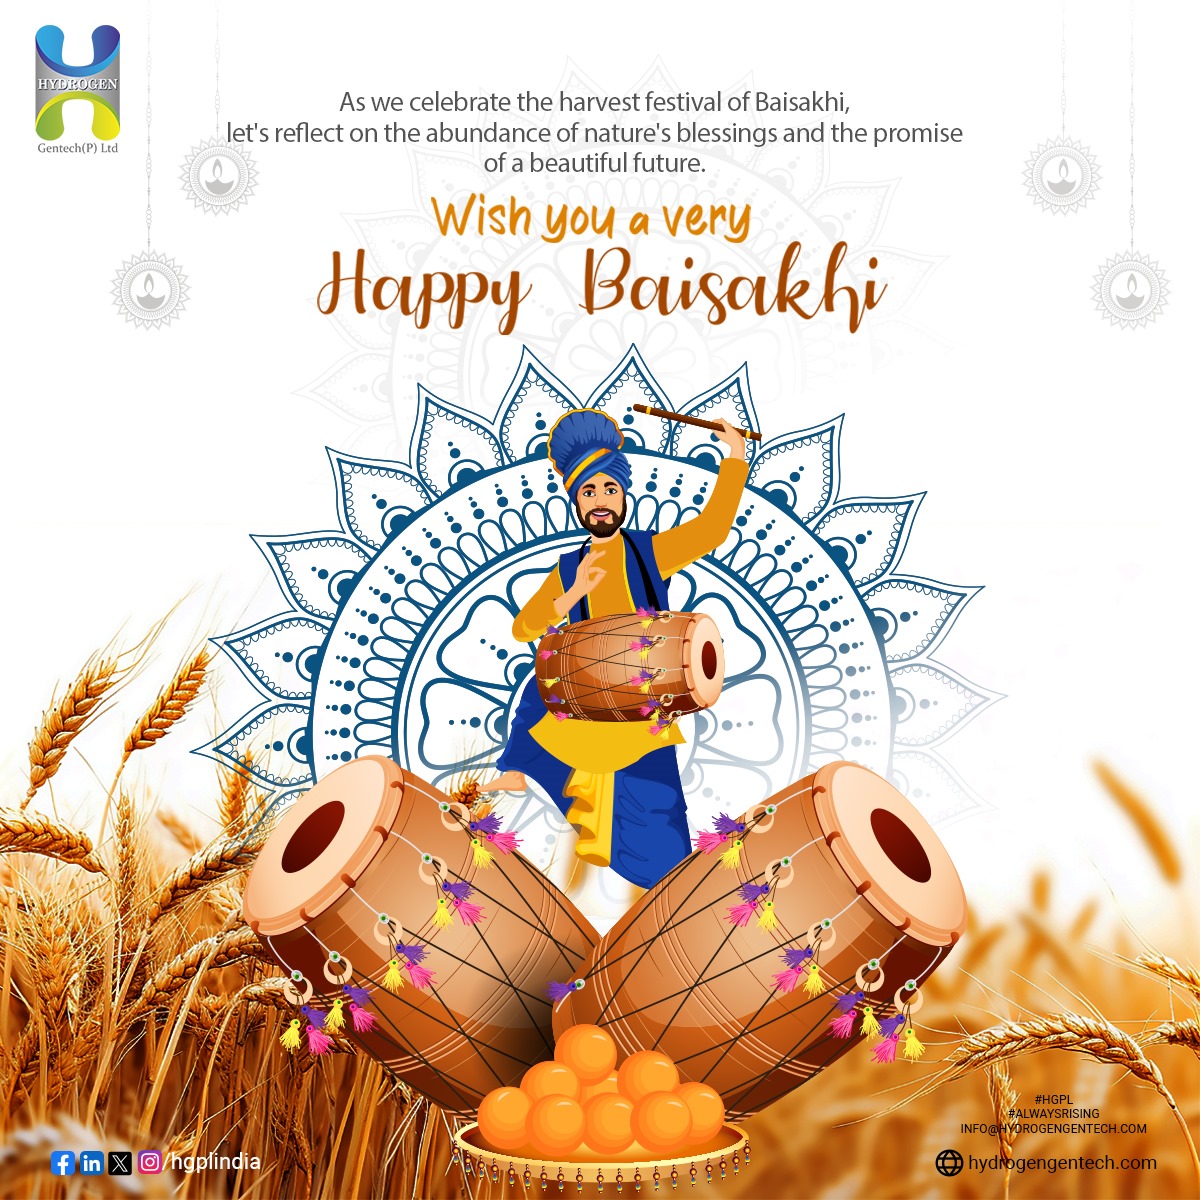 🌾 Happy Baisakhi from #HGPL! 🌞 As we celebrate the harvest festival of Baisakhi, let's reflect on the abundance of nature's blessings and the promise of a bountiful future. 🌱💧 Wishing you all joy, prosperity, and success! #HappyBaisakhi #HarvestFestival #GreenEnergy 🌾🎉